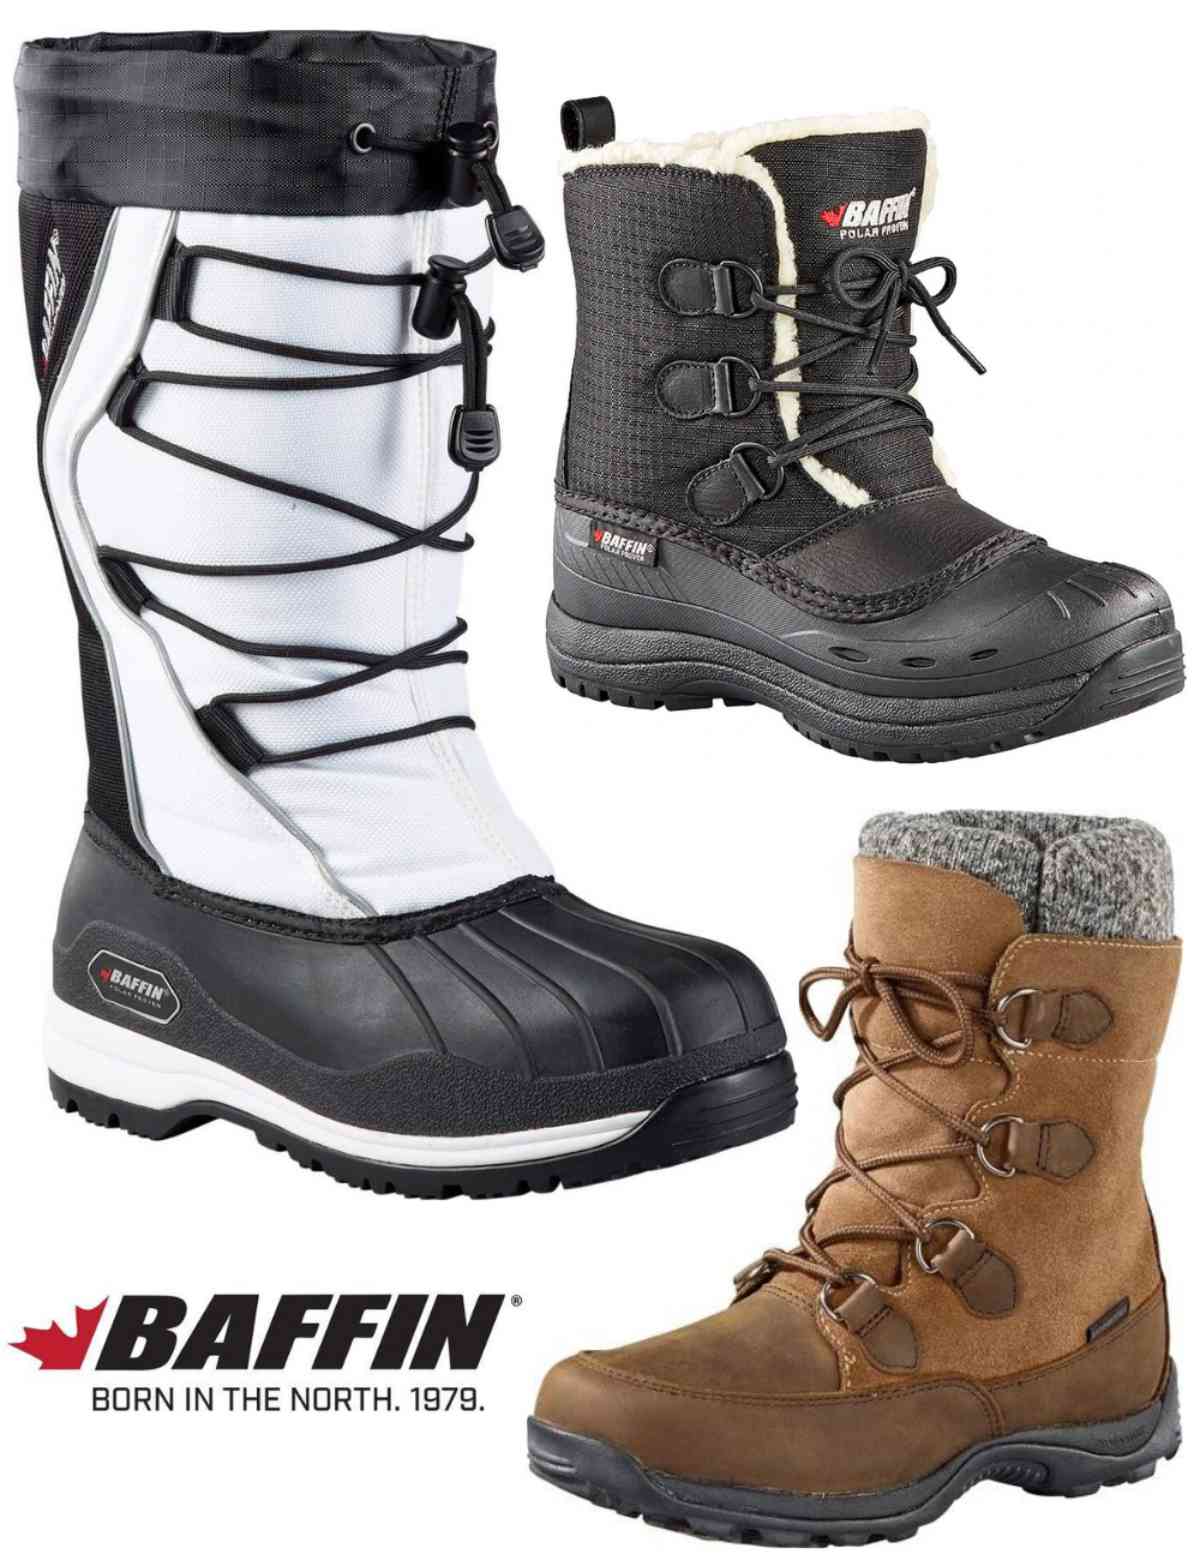 3 different Canadian winter boots for women by Baffin Boots brand.